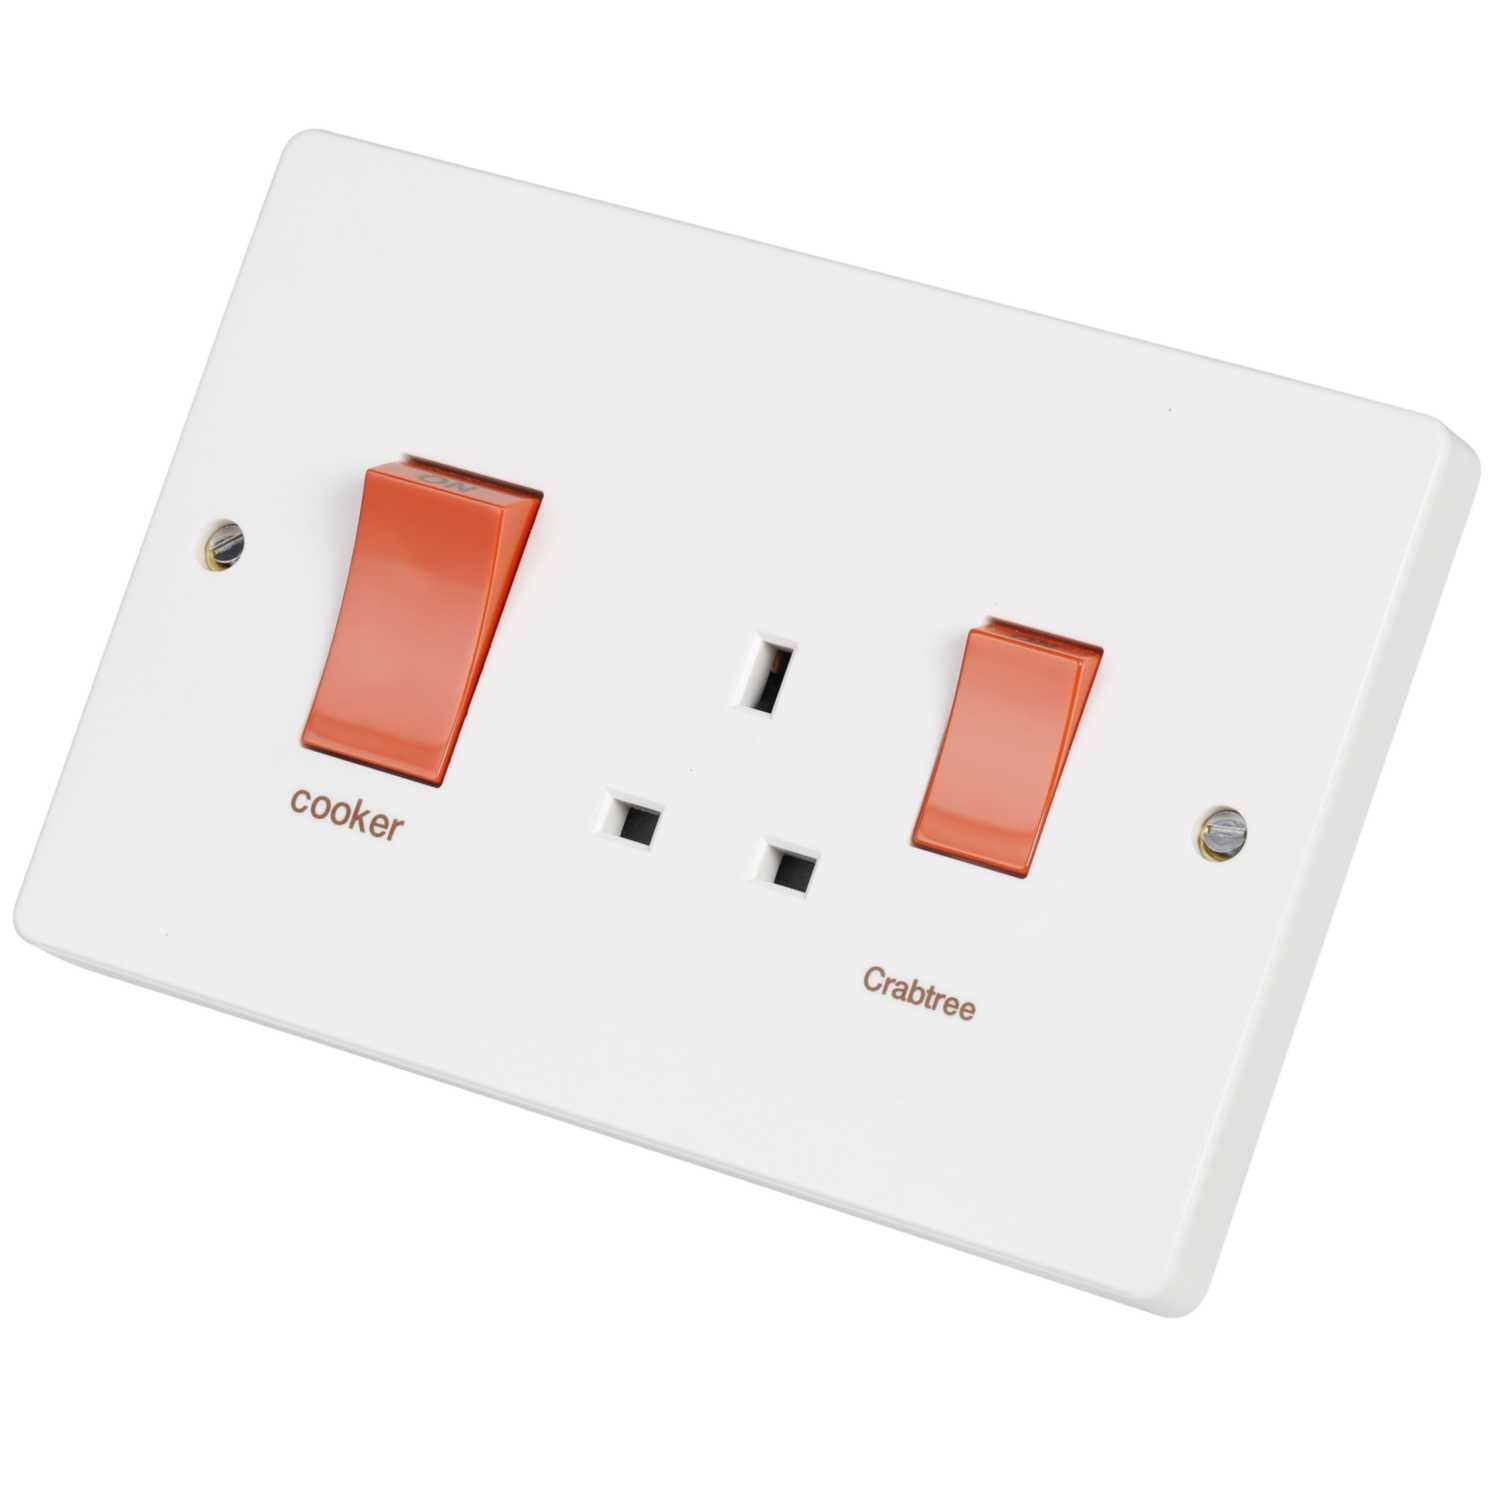 Crabtree 45A DP Cooker Control Unit | Supply Master | Accra, Ghana Switches & Sockets Buy Tools hardware Building materials